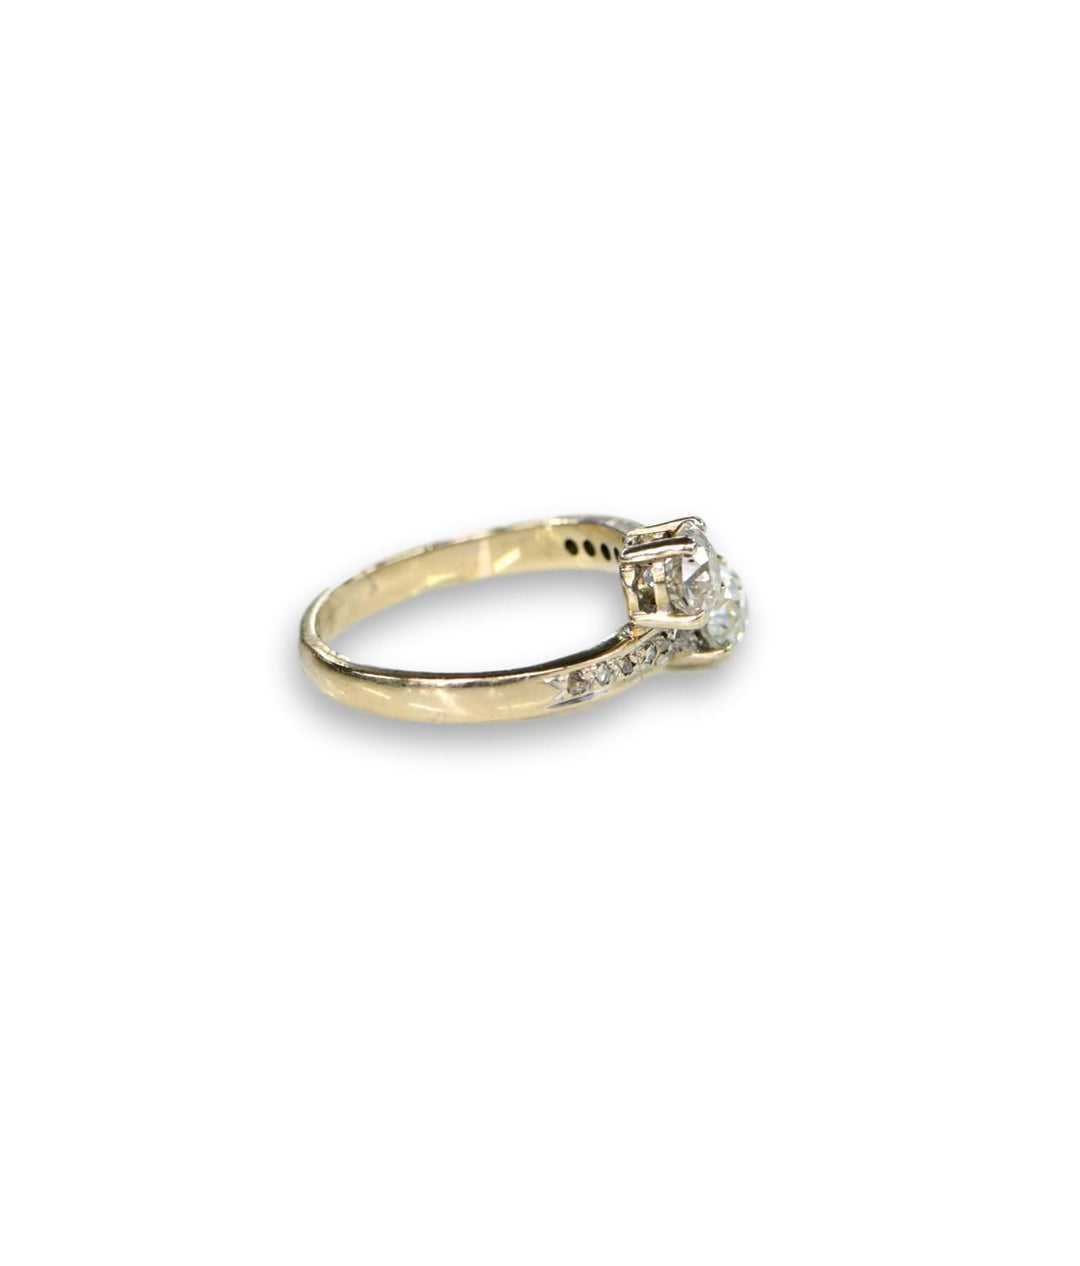 Antique Old Cut Diamond Gold Crossover Ring - SOLD